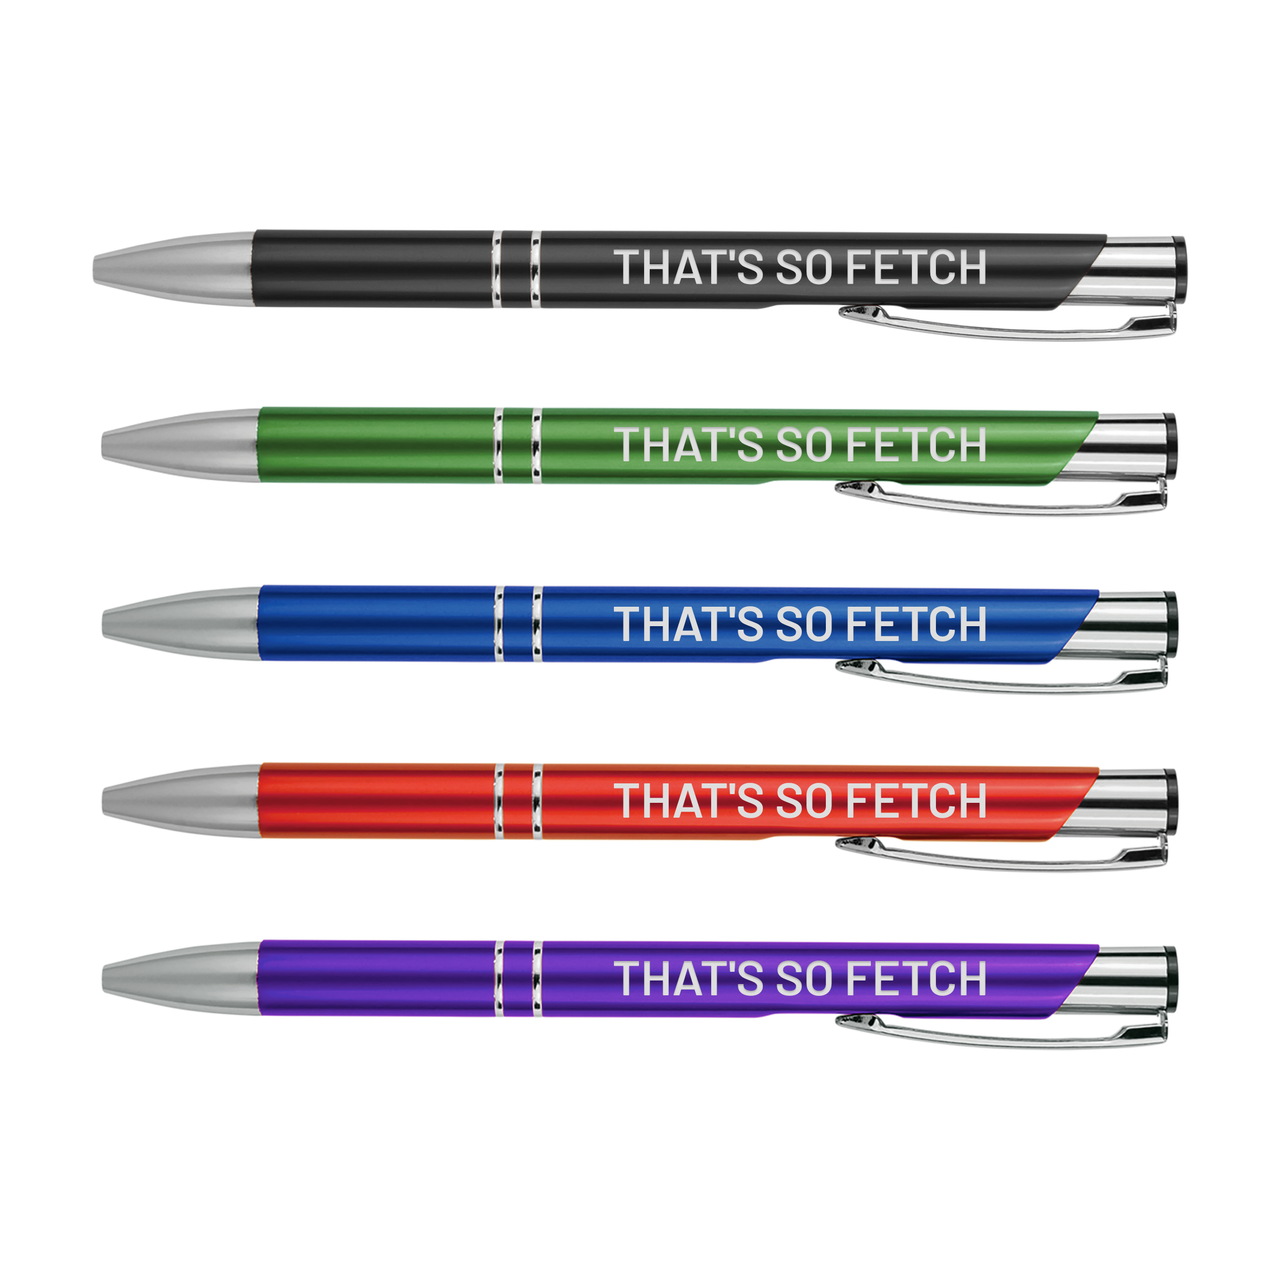 That's So Fetch Metal Pens | Motivational Writing Tools Office Supplies Coworker Gifts Stocking Stuffer Baum Designs